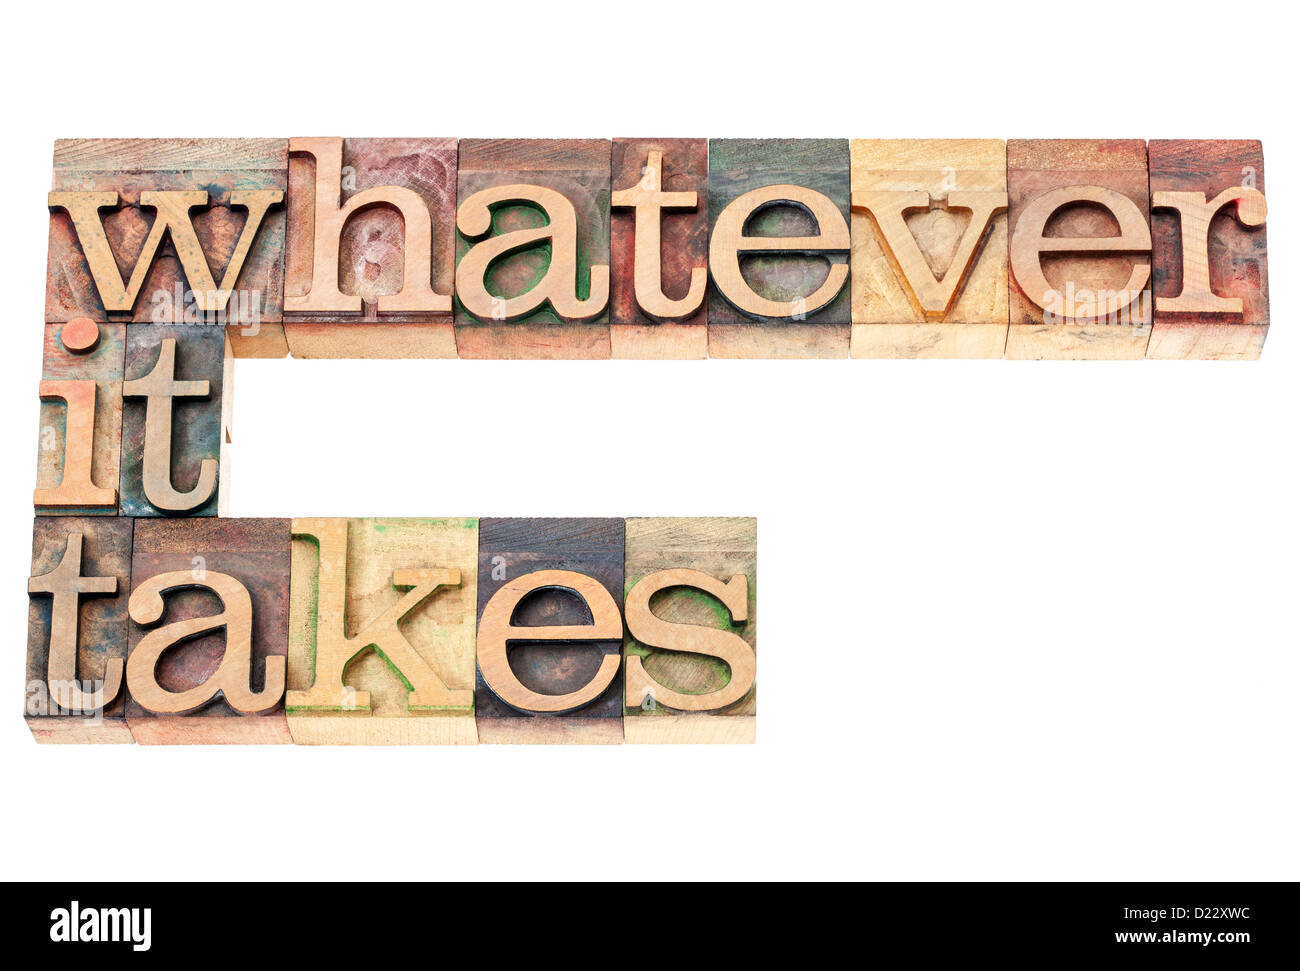 whatever it takes - determination concept - isolated text in vintage letterpress wood type printing blocks Stock Photo